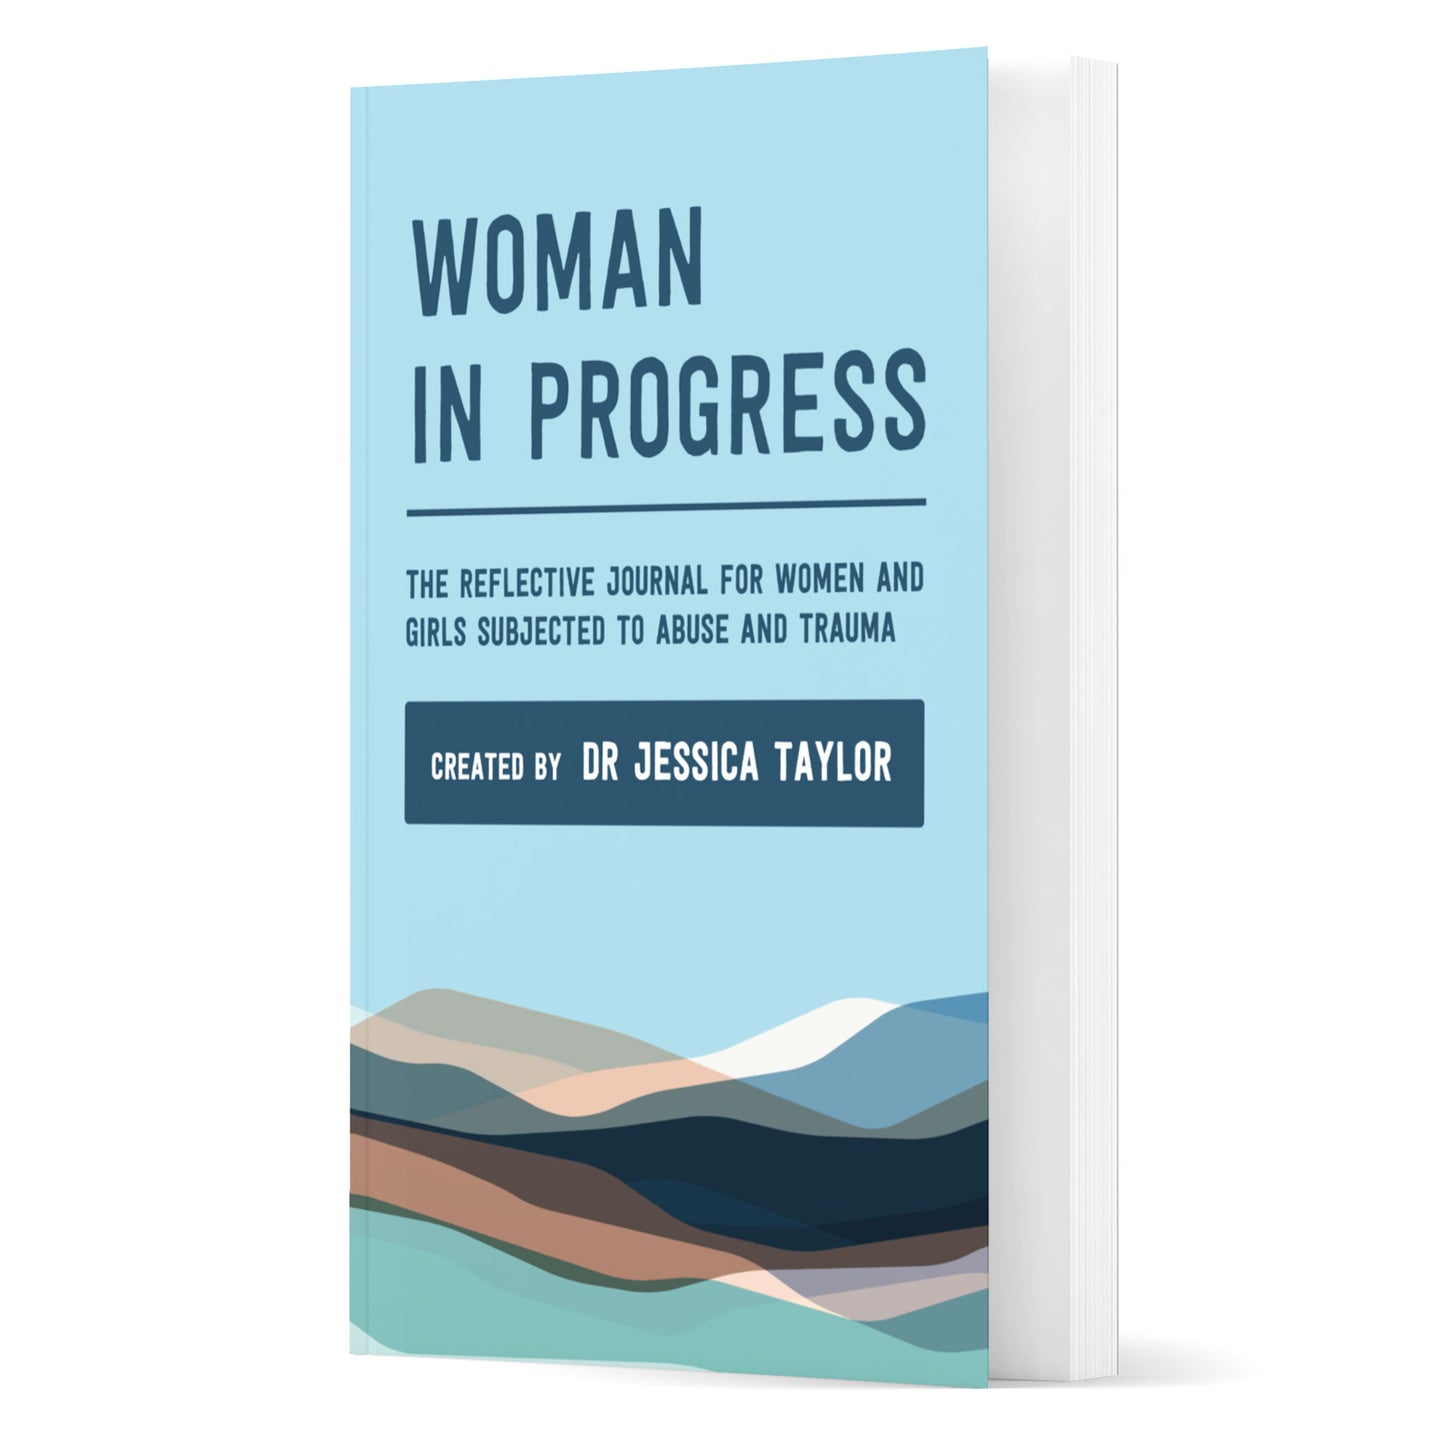 Woman in Progress: The Reflective Journal for Women and Girls Subjected to Abuse and Trauma